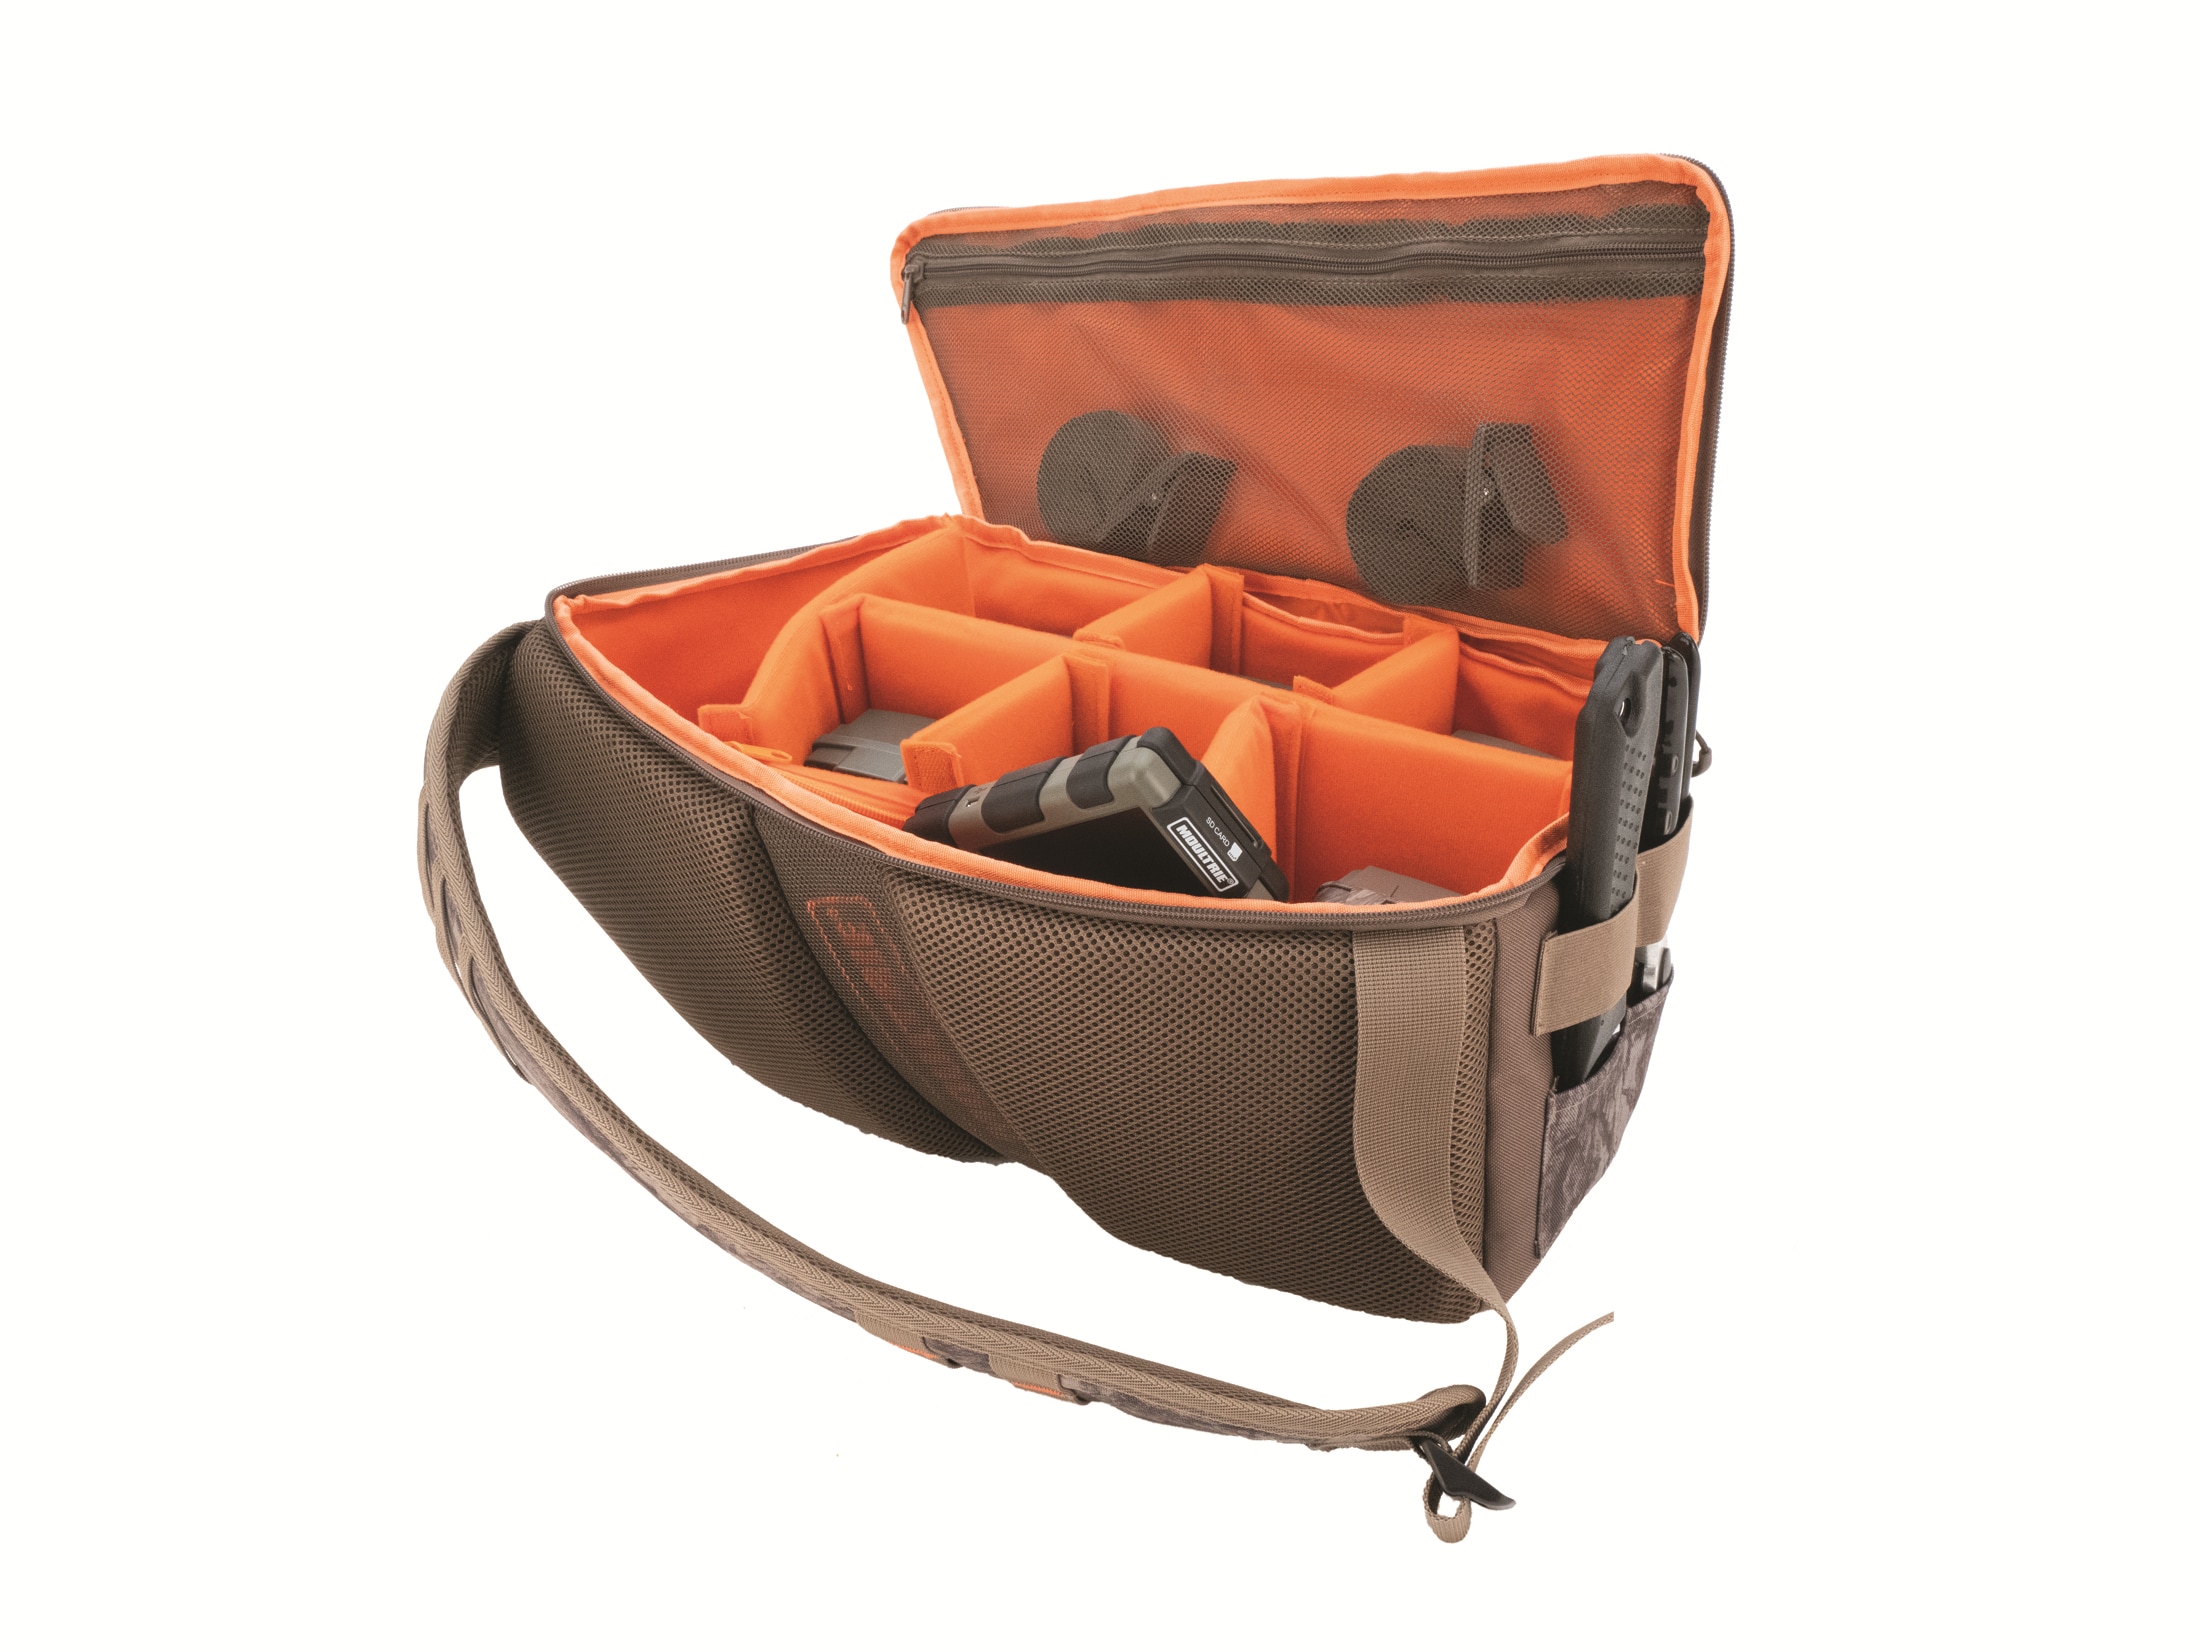 Moultrie Trail Camera Bag For Sale